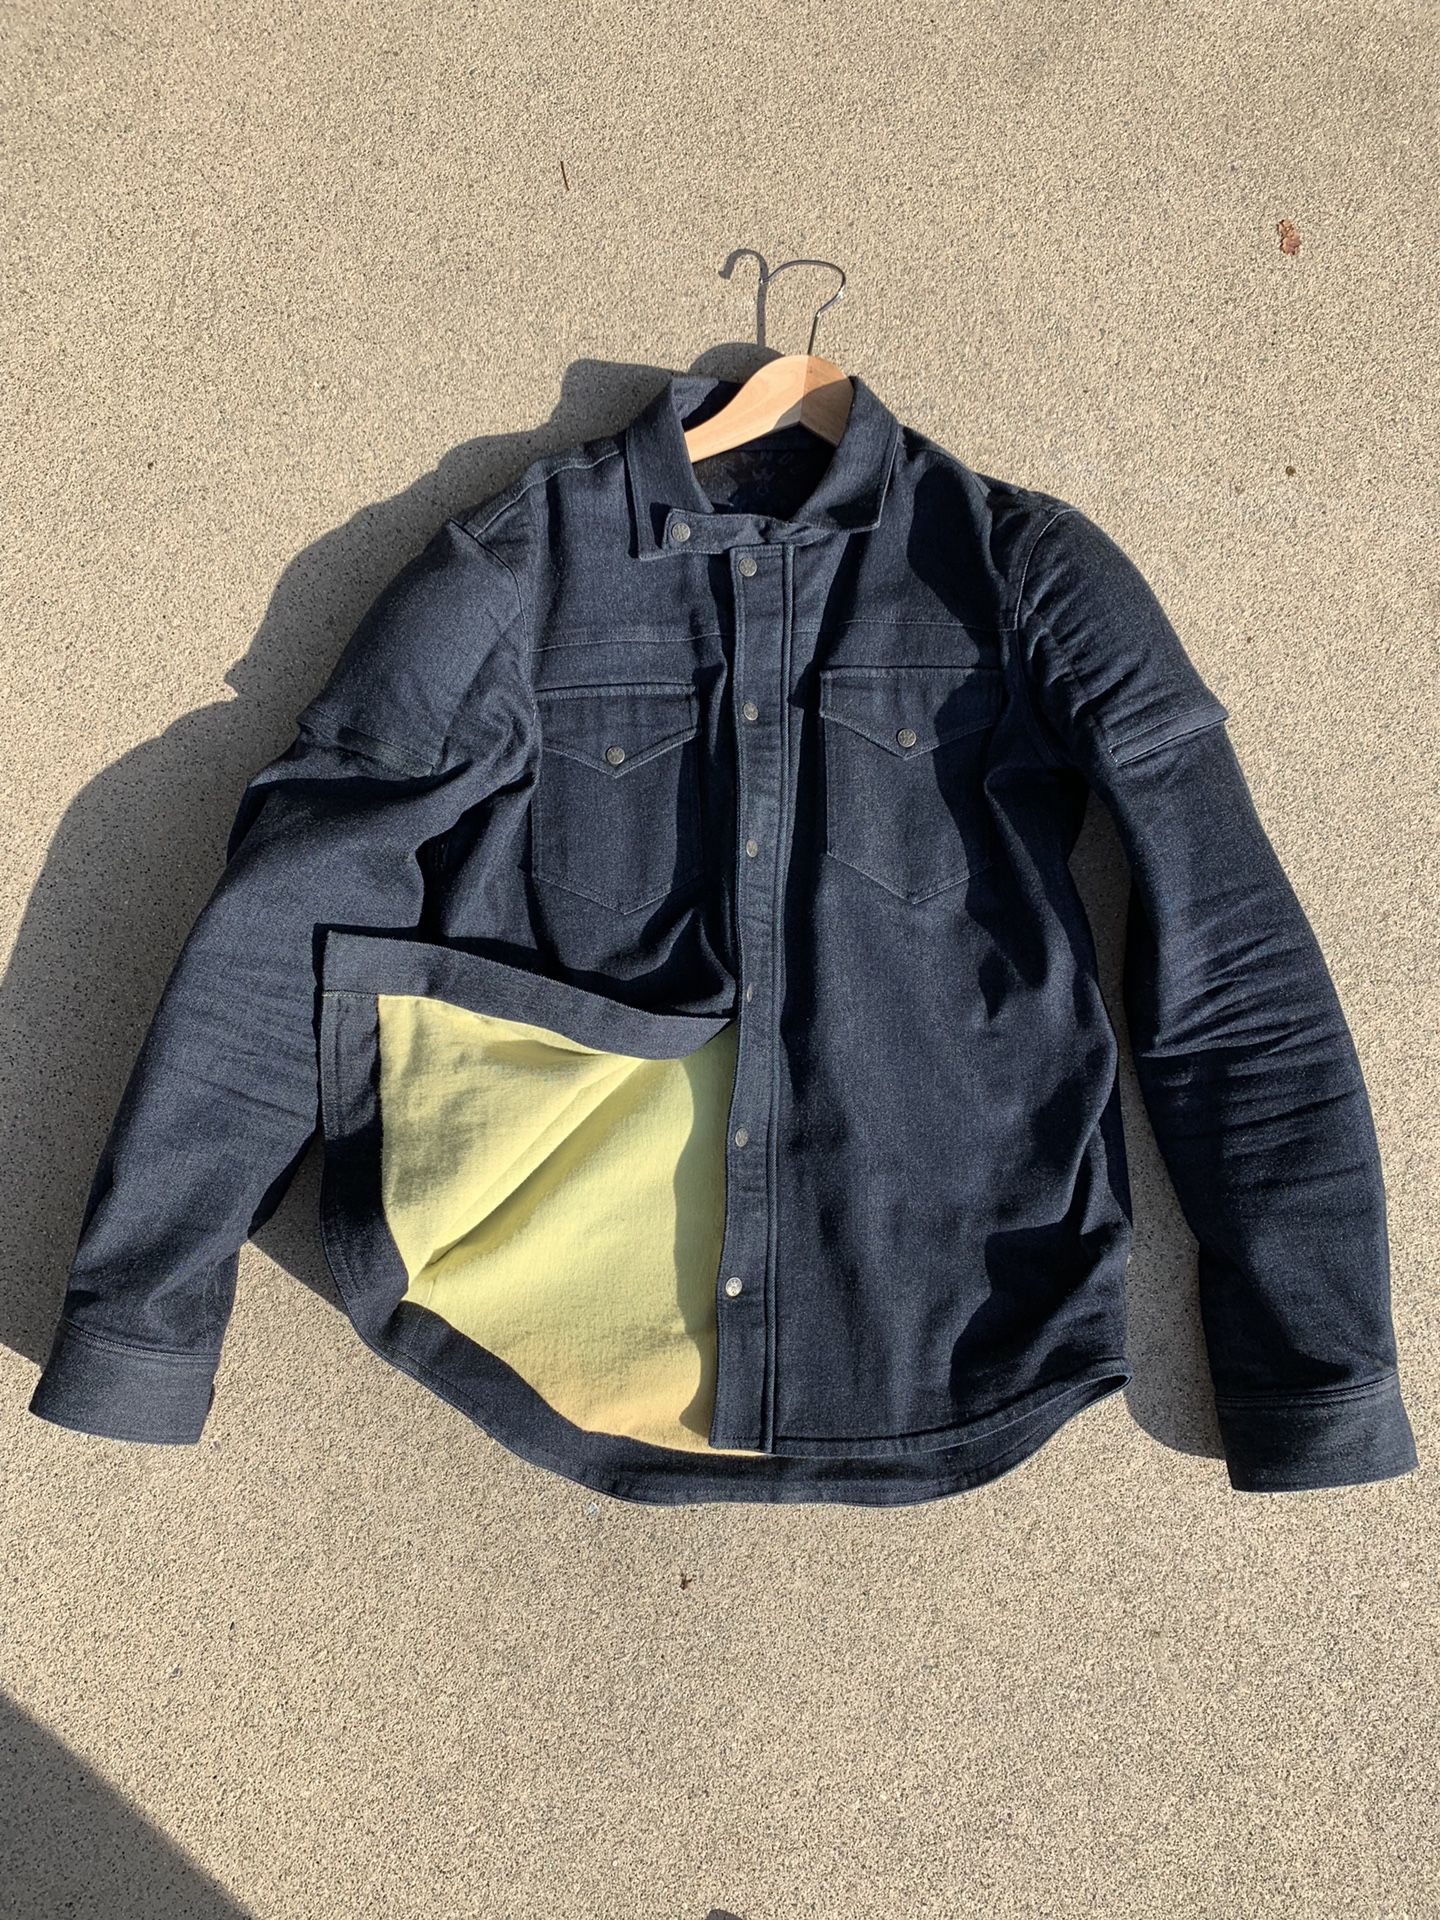 Pando Moto Kevlar Jeans Jacket with removable pads